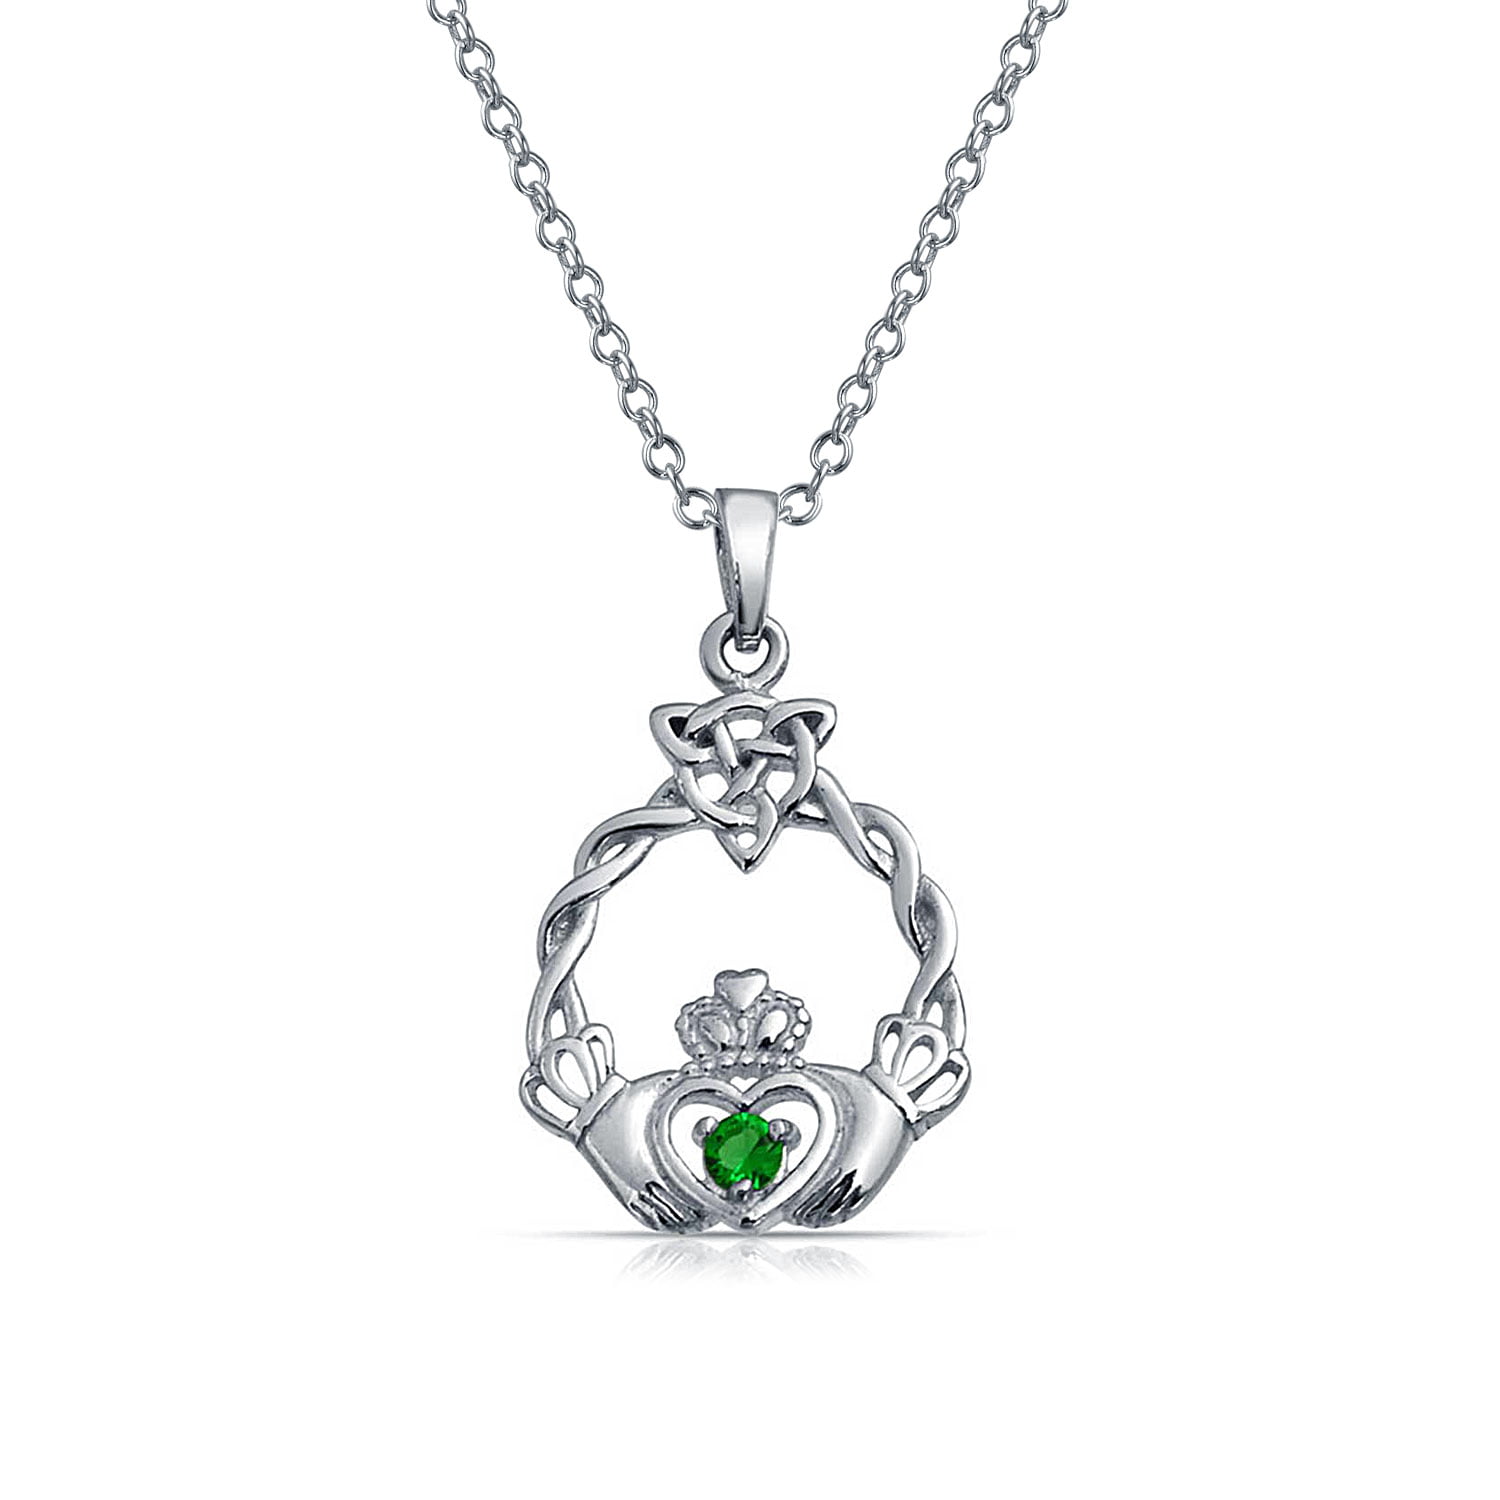 Circle Simulated Ruby Cubic Zirconia Claddagh Pendant Sterling Silver